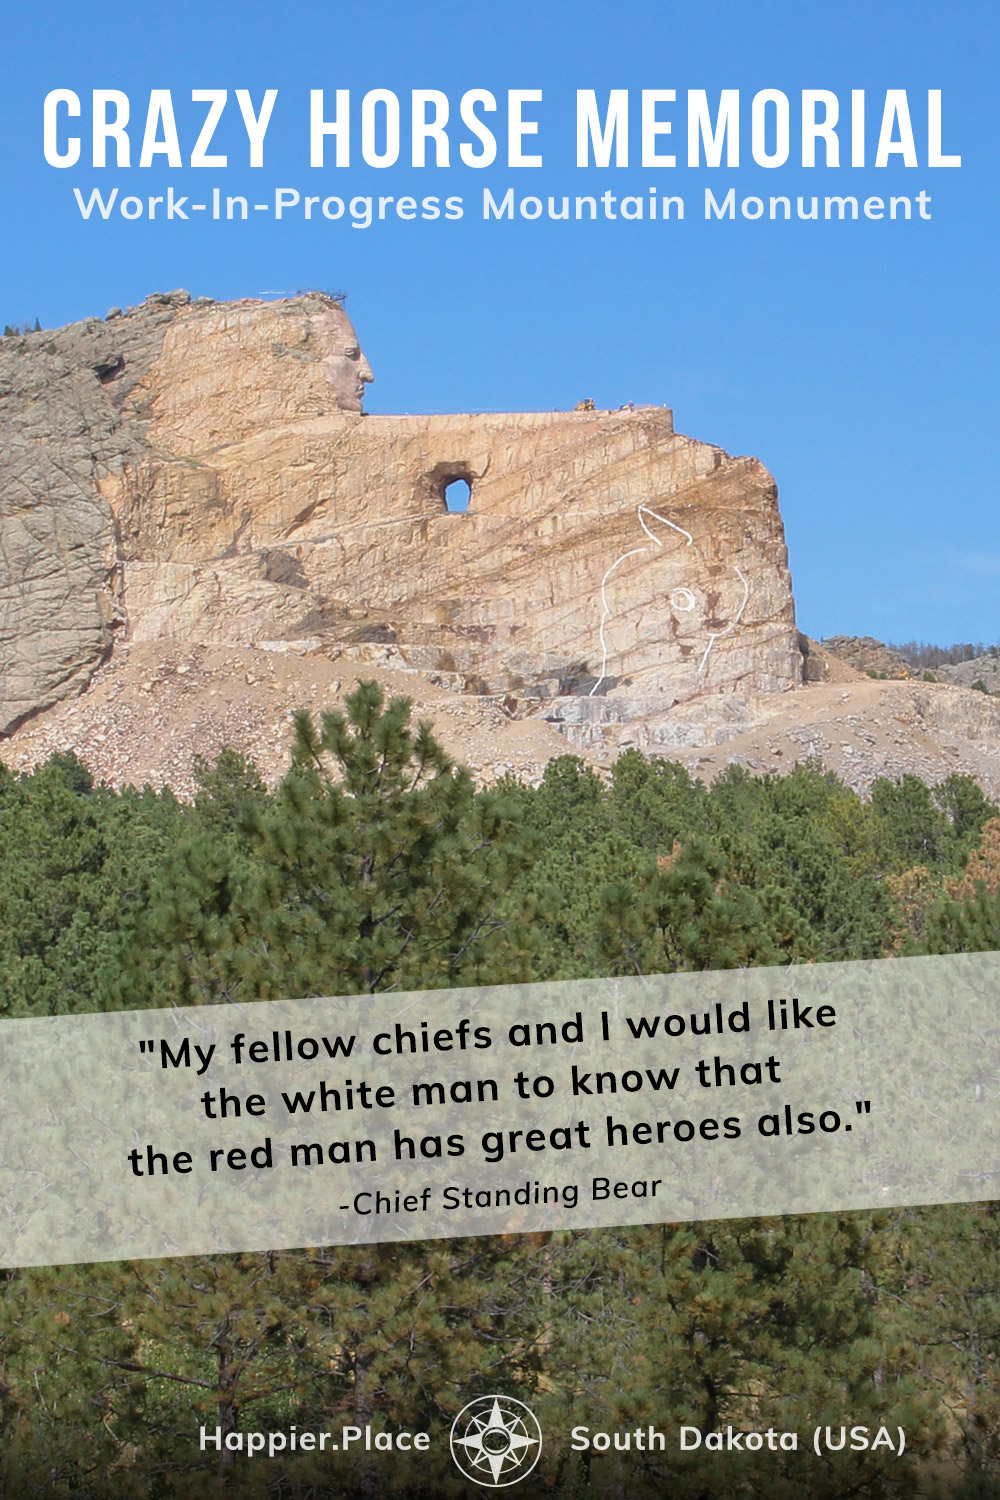 Crazy Horse Memorial: Epic Work-In-Progress Mountain Monument in South Dakota, USA. 'My fellow chiefs and I would like the white man to know that the red man has great heroes also.' - Chief Henry Standing Bear